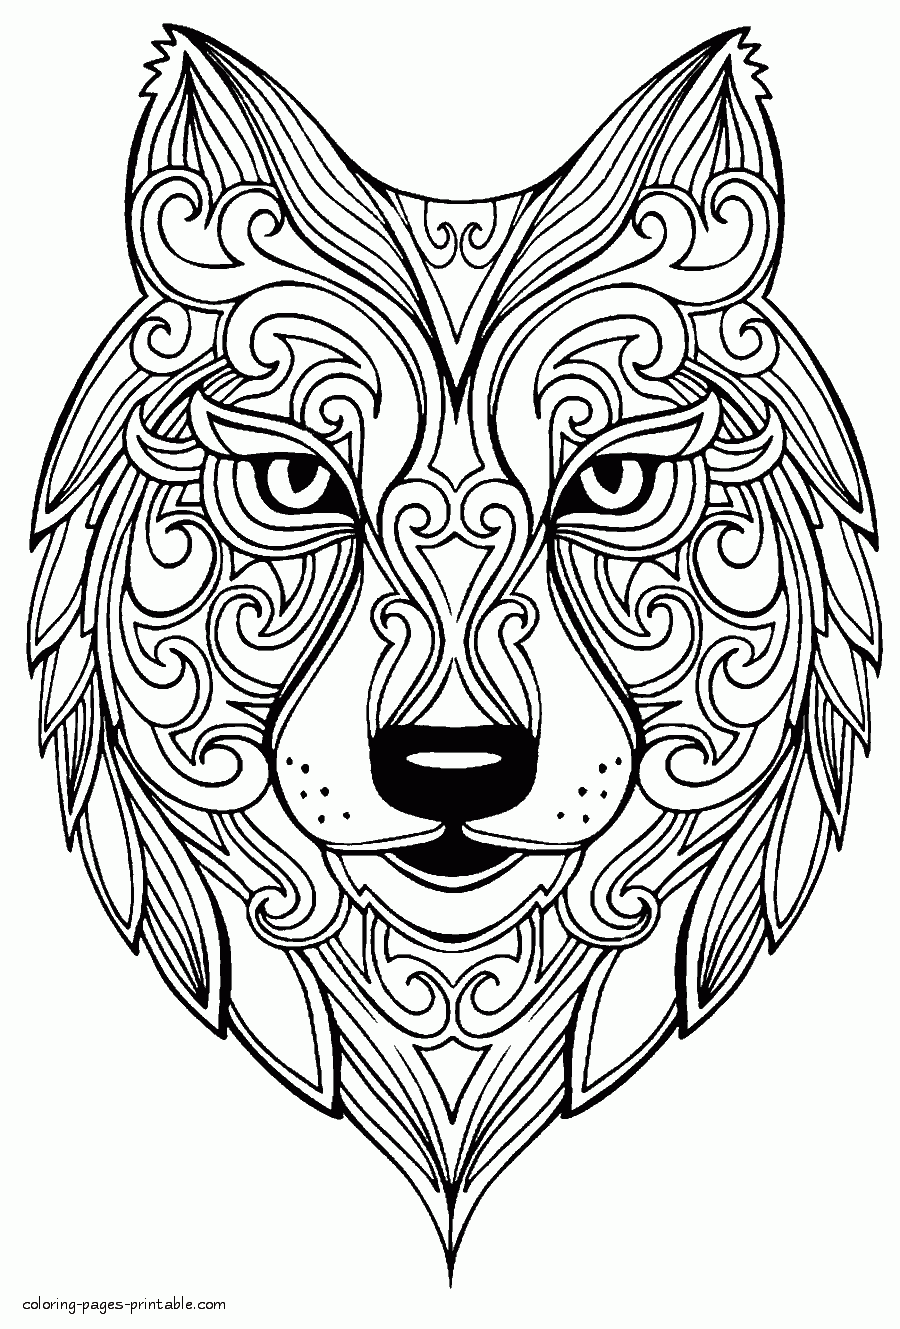 Animal Printable Coloring Pictures For Adults || COLORING-PAGES -PRINTABLE.COM